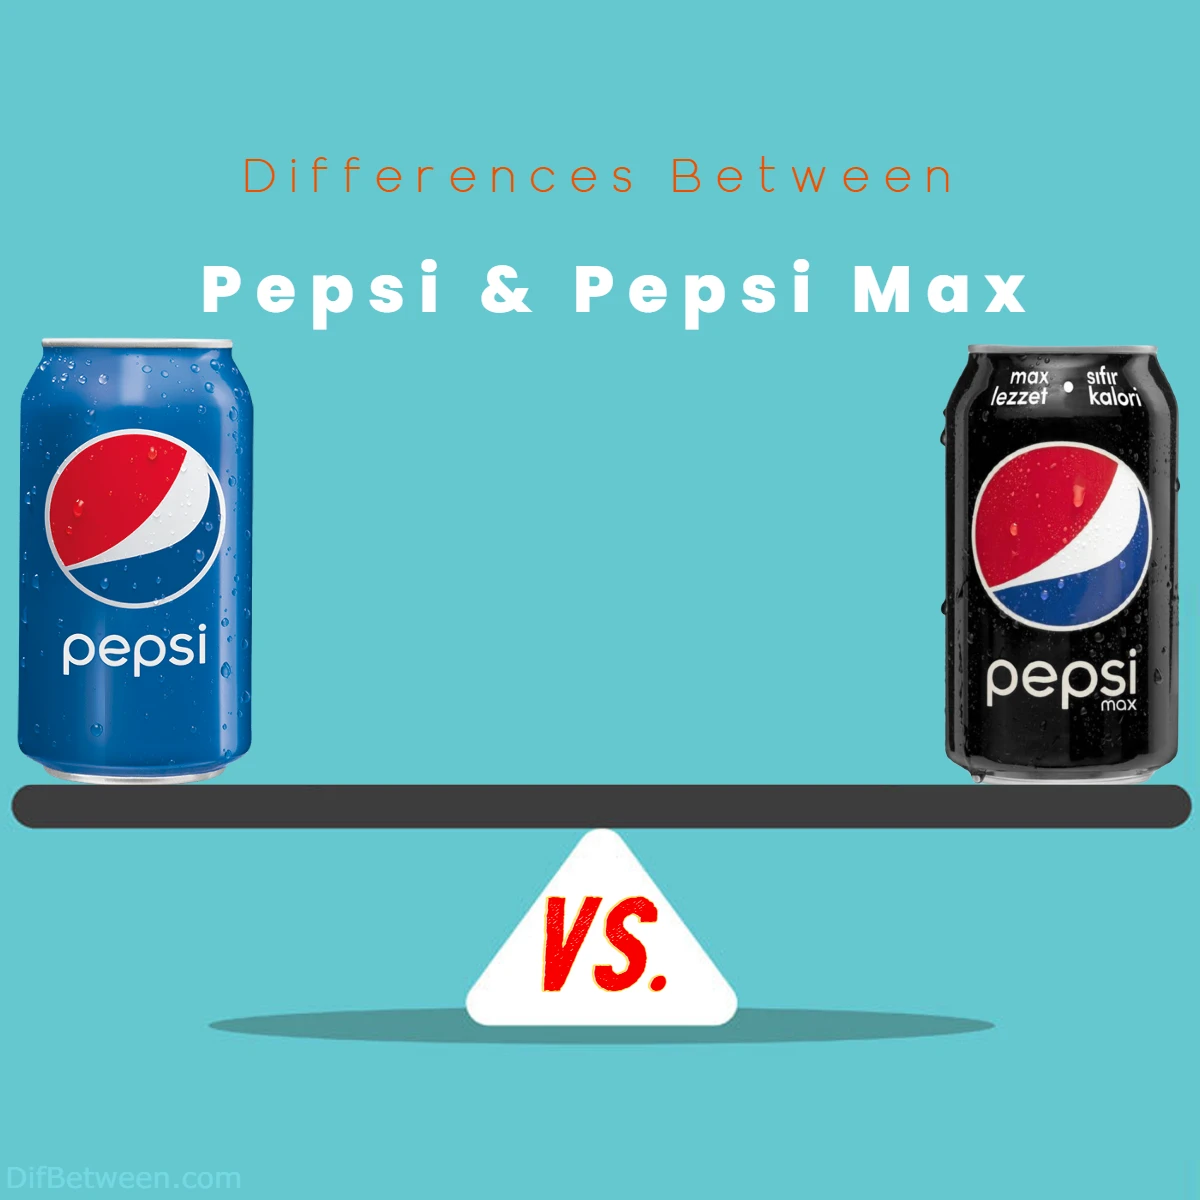 Differences Between Pepsi Max and Pepsi